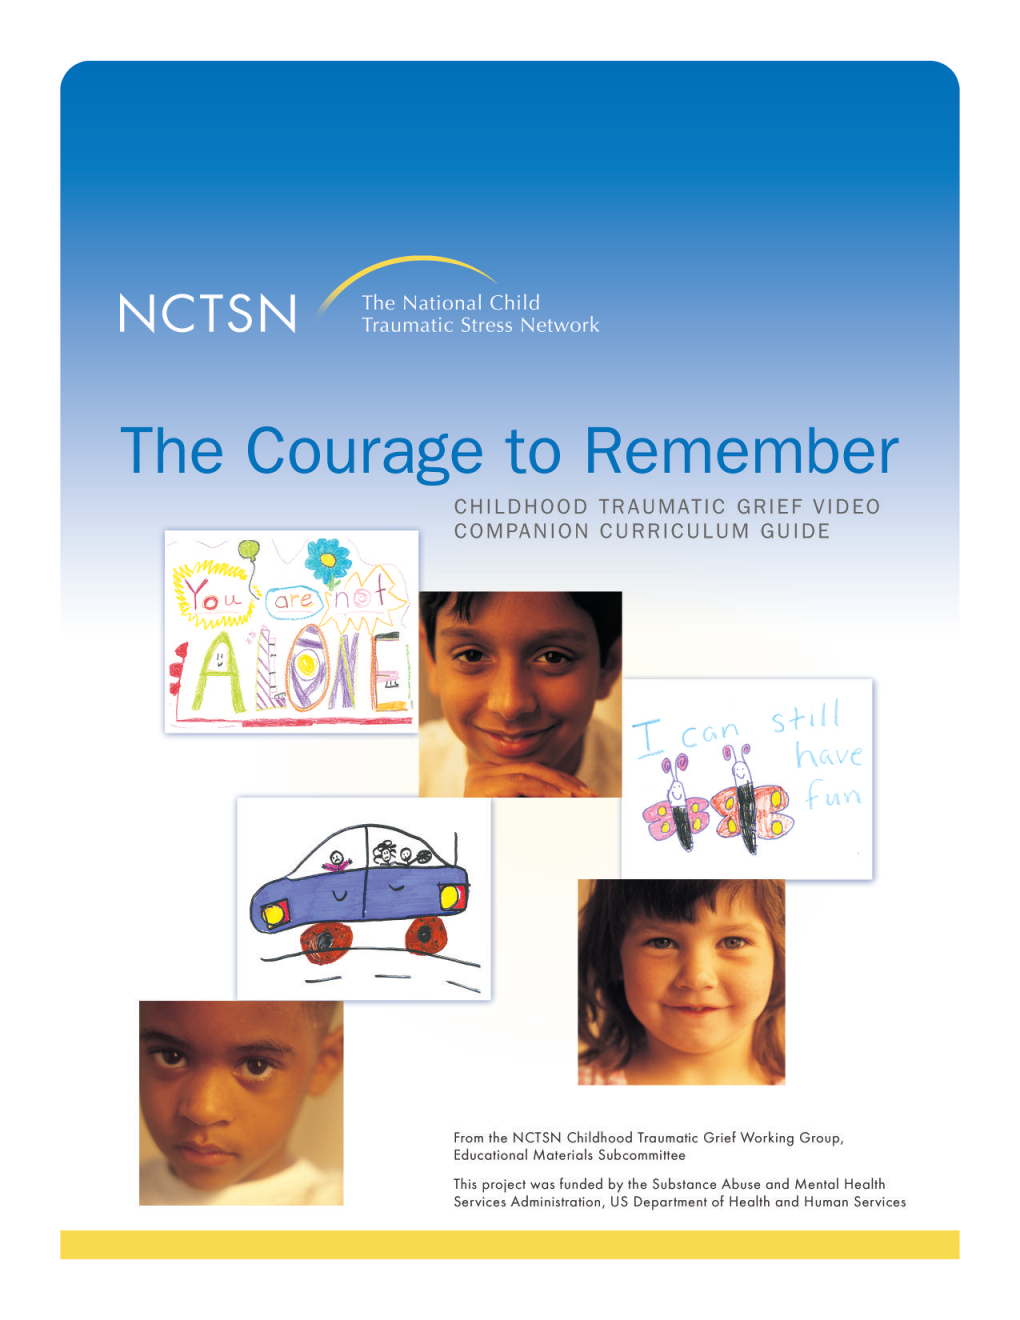 The Courage to Remember: Childhood Traumatic Grief